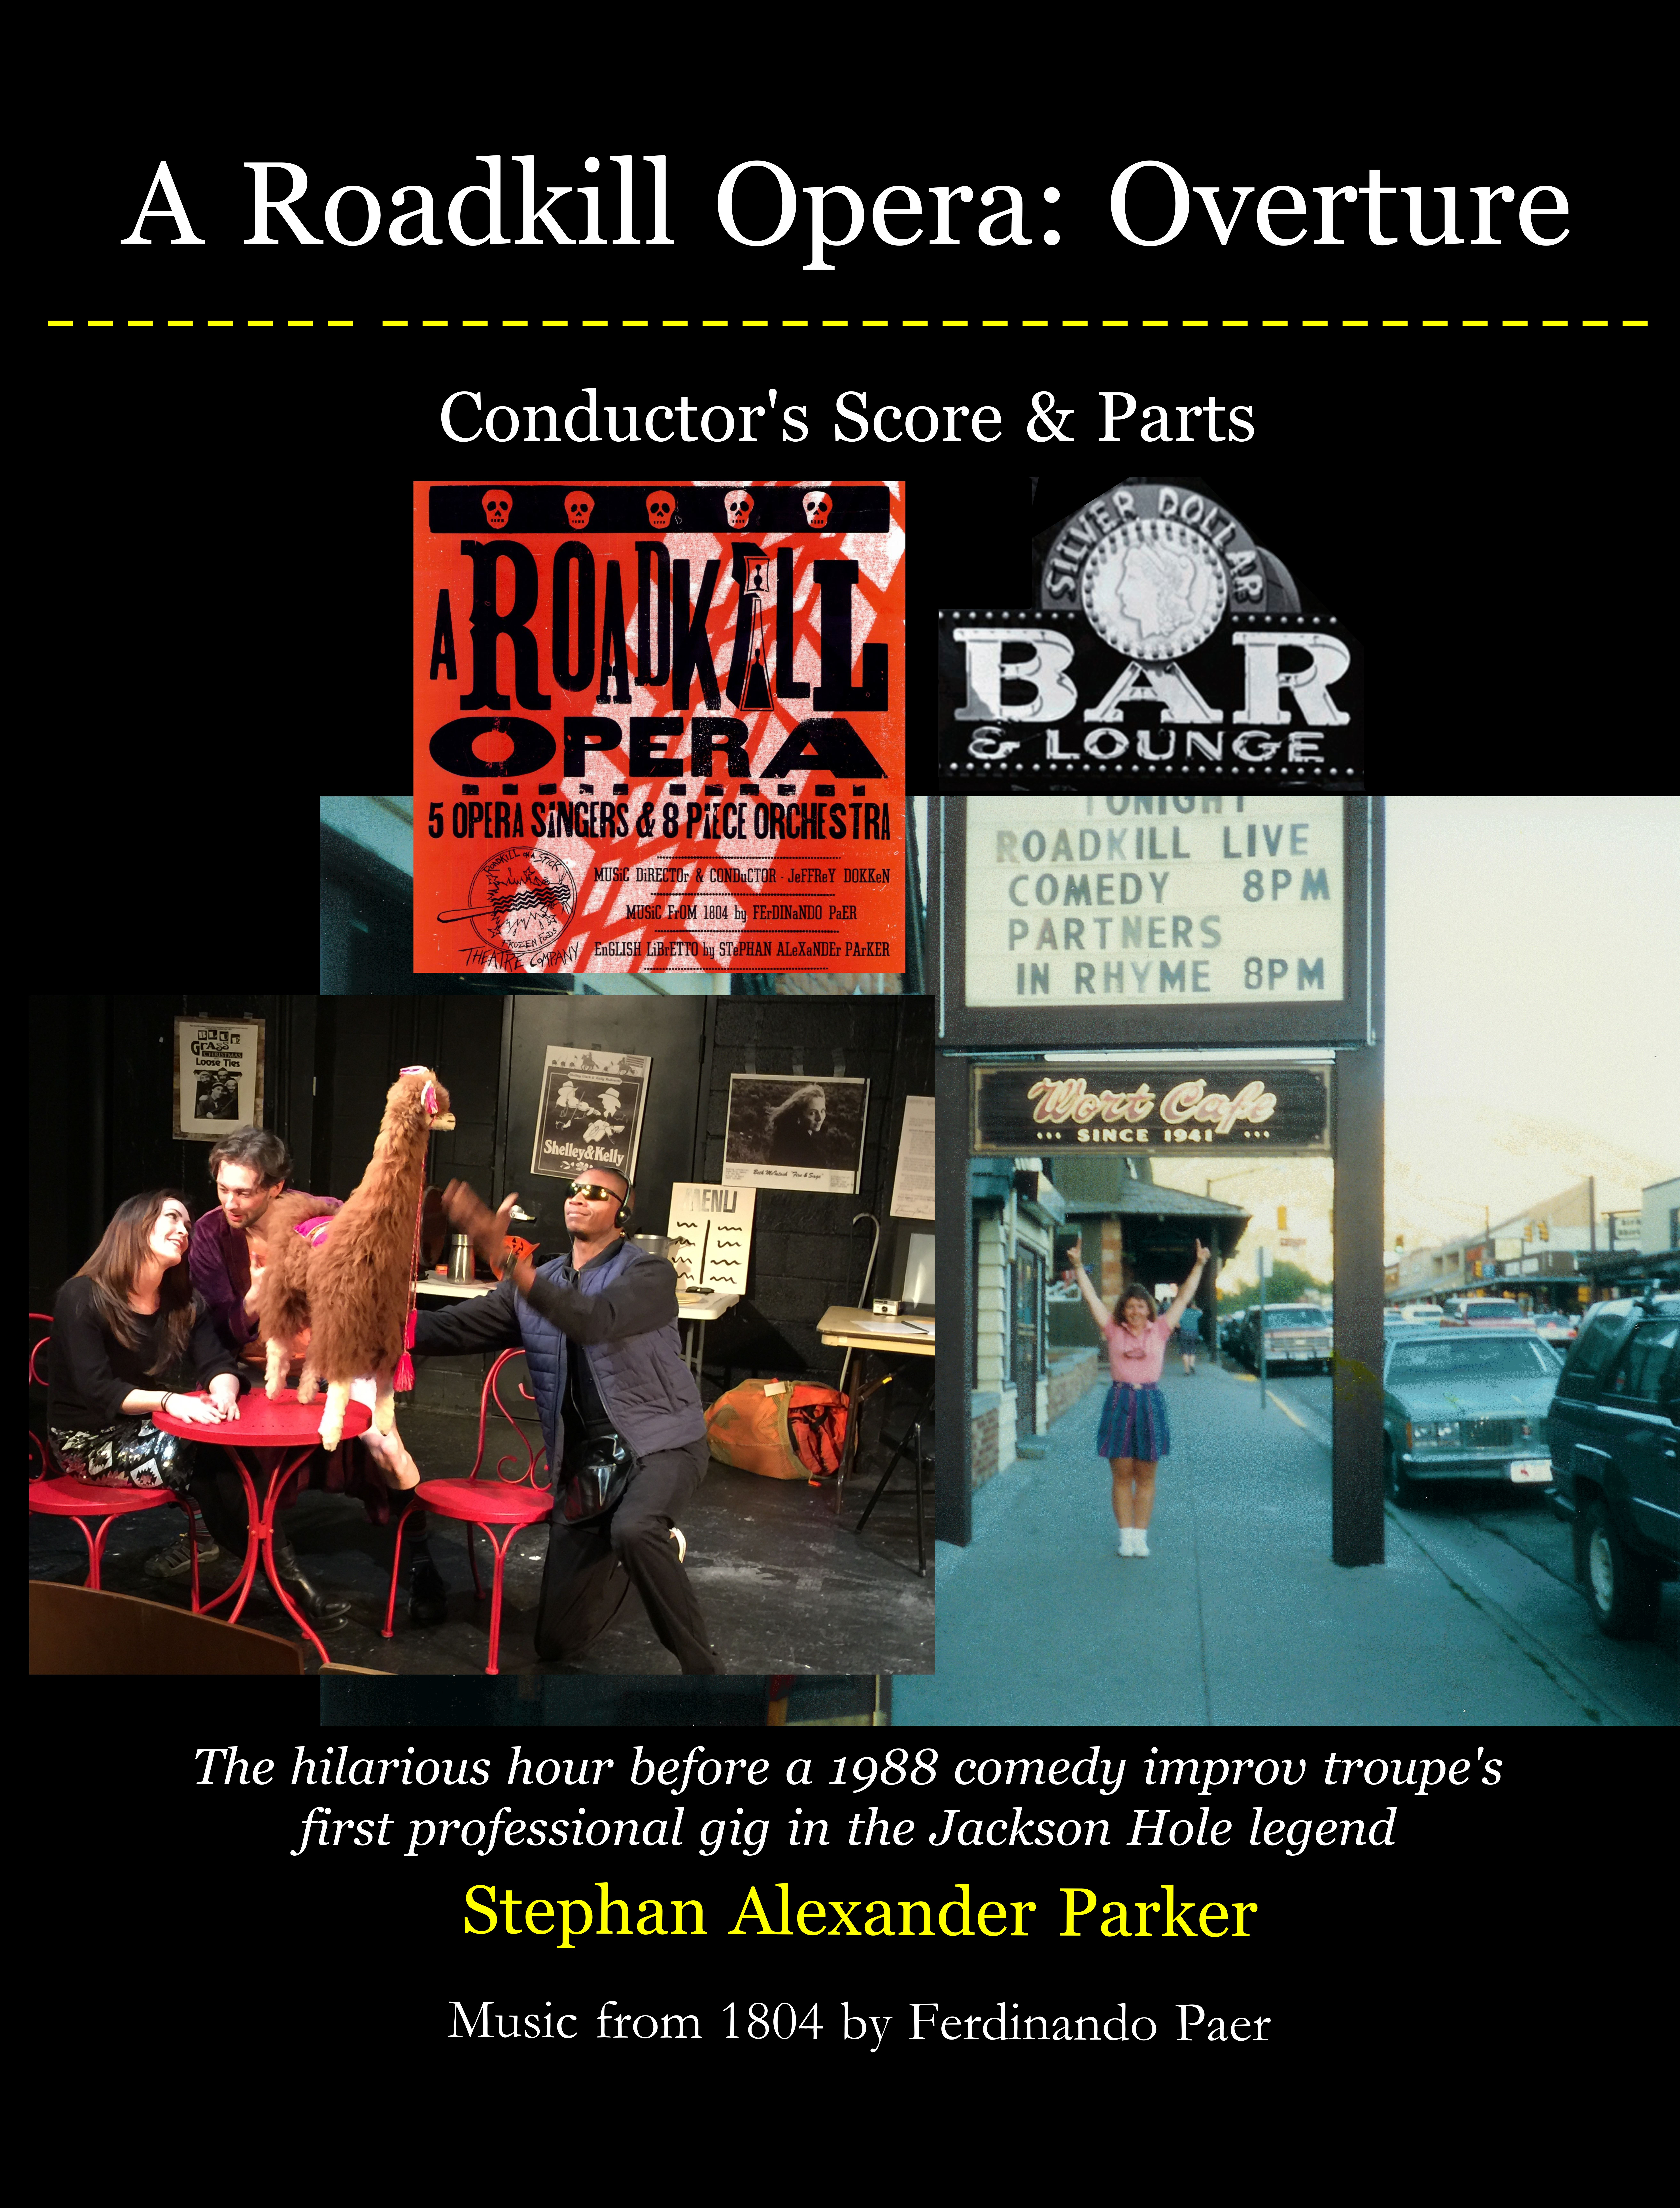 Photo of the cover from A Roadkill Opera: Overture Conductor's Score & Parts, which has the logo from A Roadkill Opera, a cheerleader standing under the 1988 marquee of the Silver Dollar Bar & Lounge, and a photo of the cast in the January 2016 world premiere performance sitting at a bistro table with a stuffed llama.